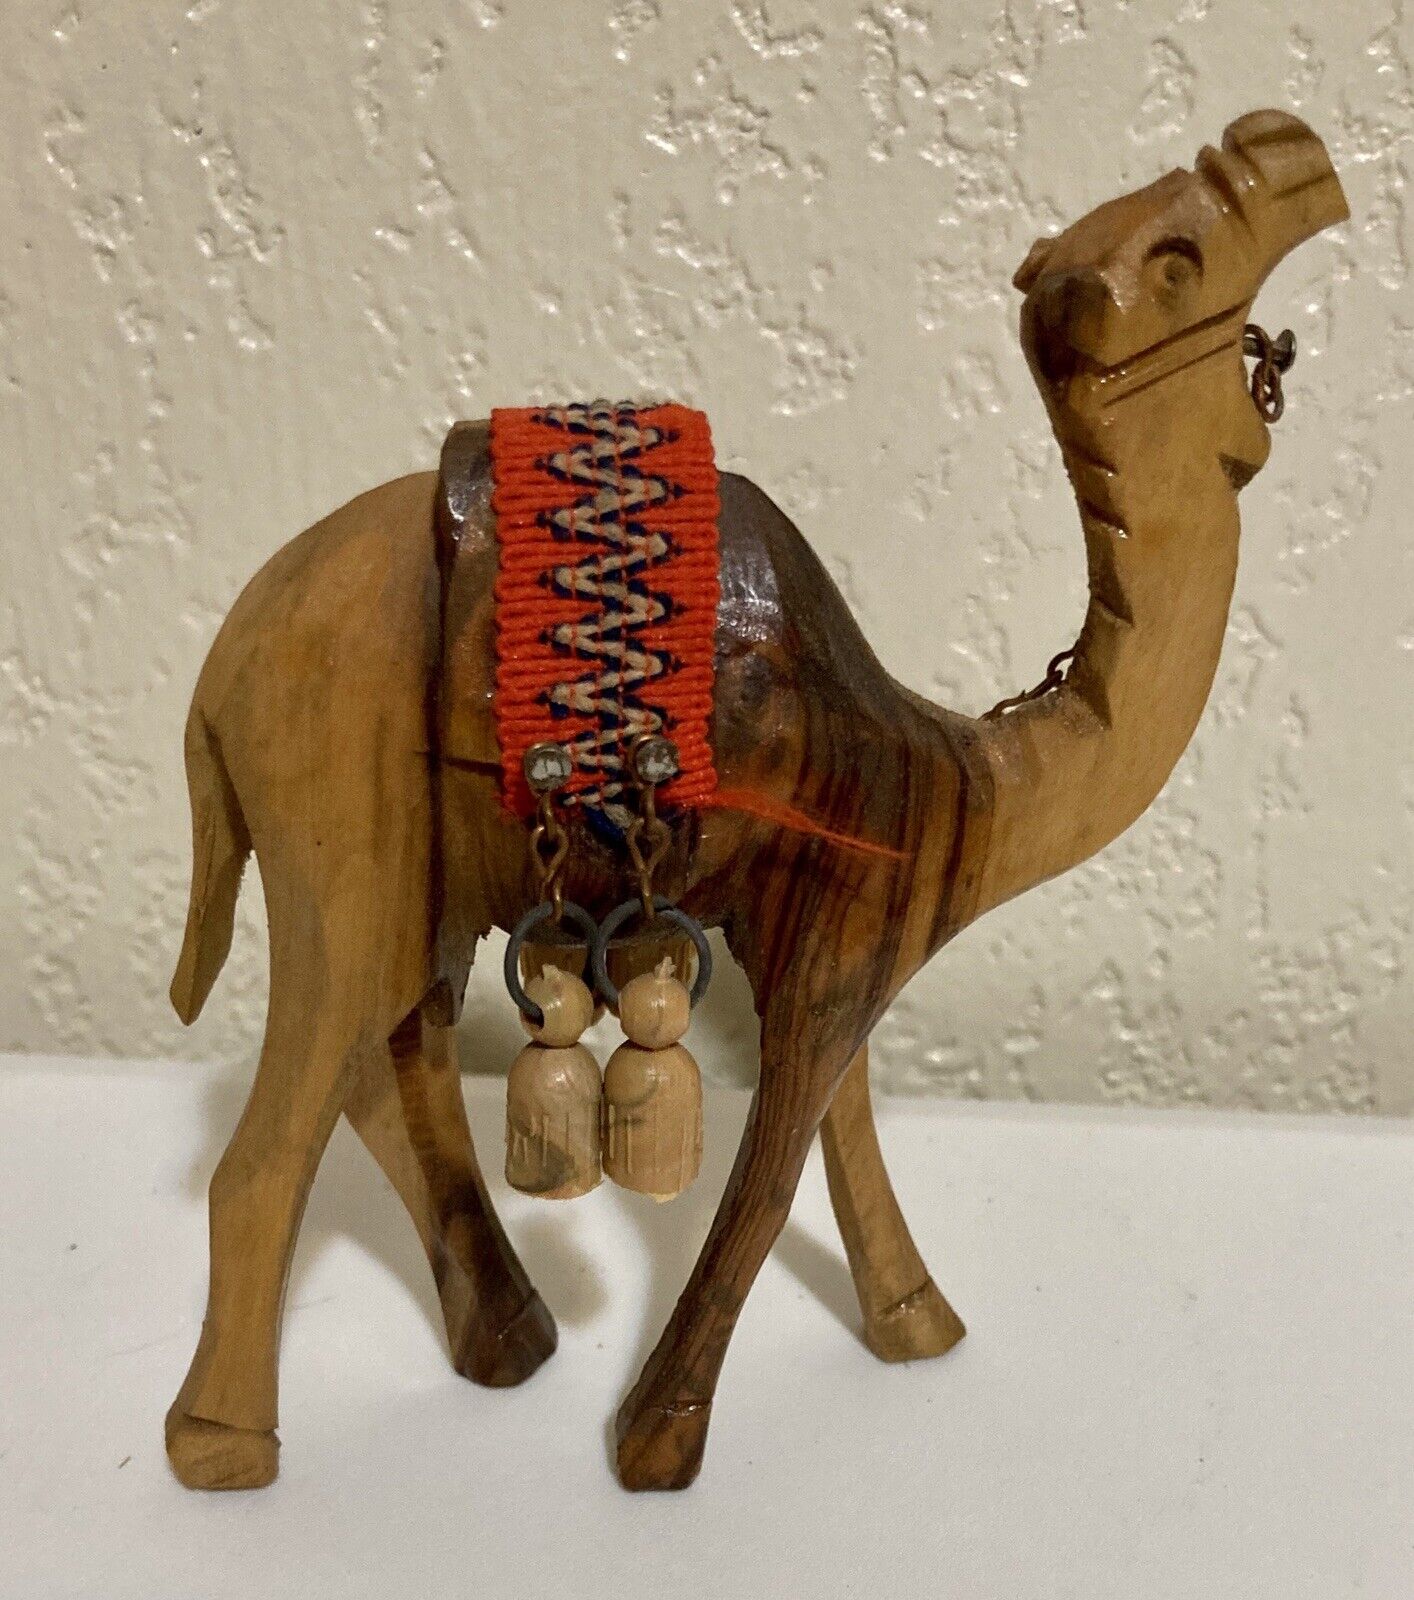 Vintage Wooden Handcrafted Camel Figurine 4” Decor Gift Desert Collectible